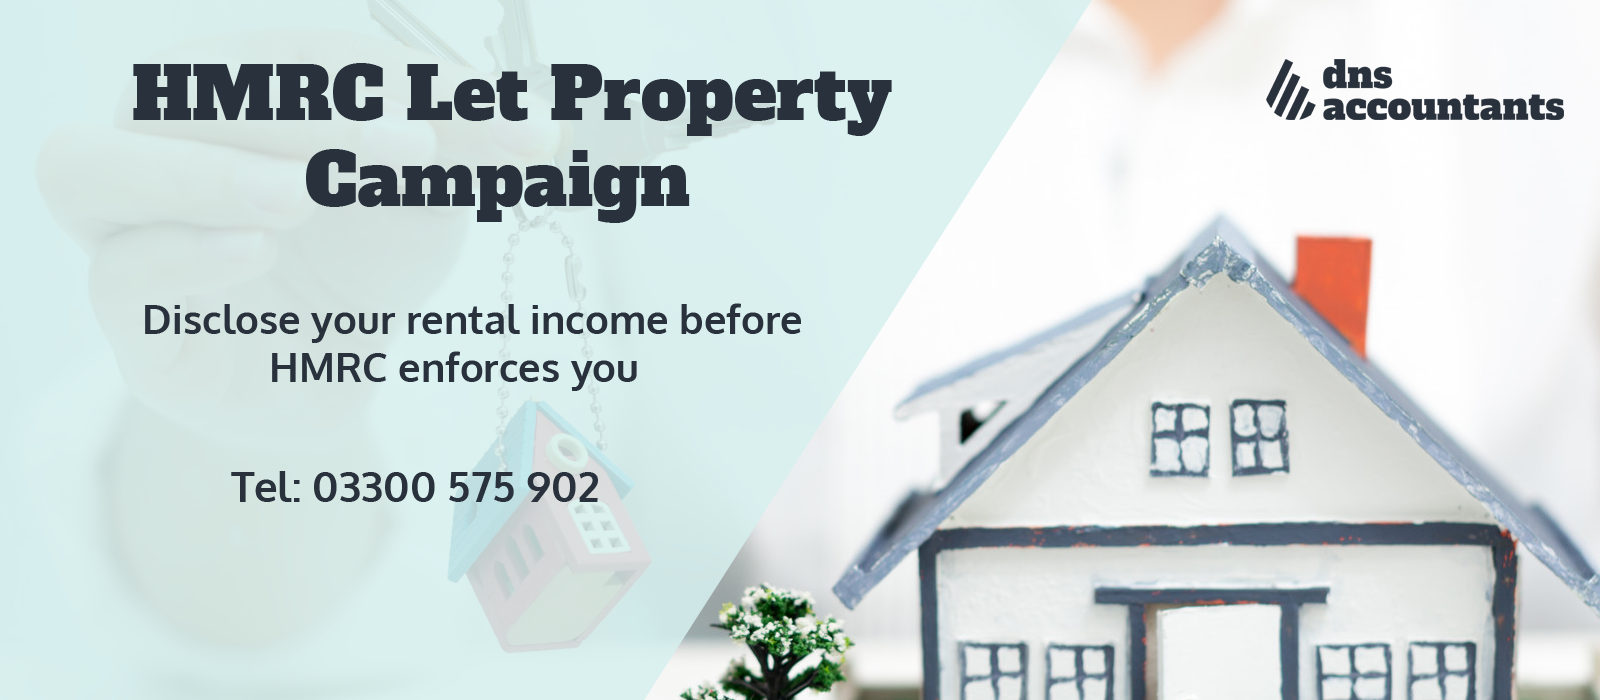 HMRC Let Property Campaign: Understand Landlords Tax On Rental Income